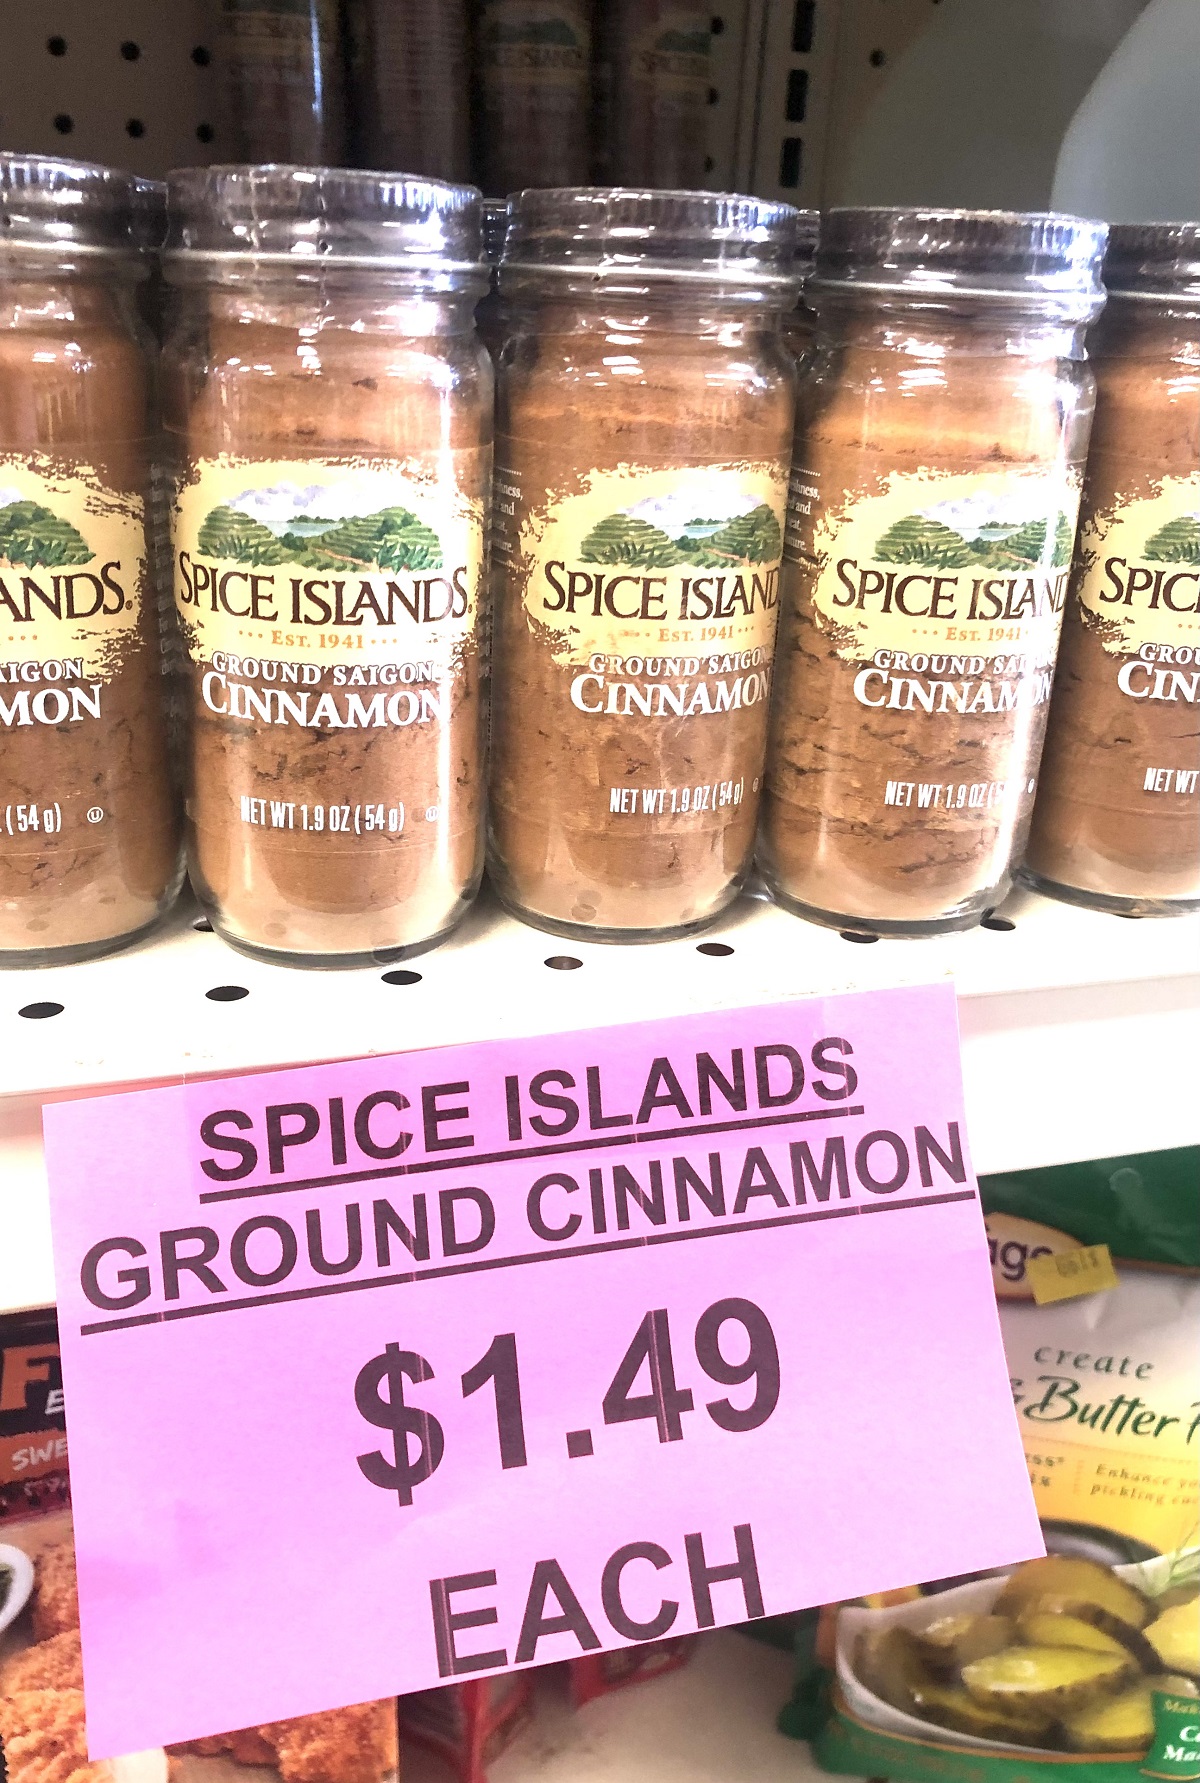 Cheap cinnamon, purchased at a salvage grocery store. Click through to learn more about saving money on groceries.